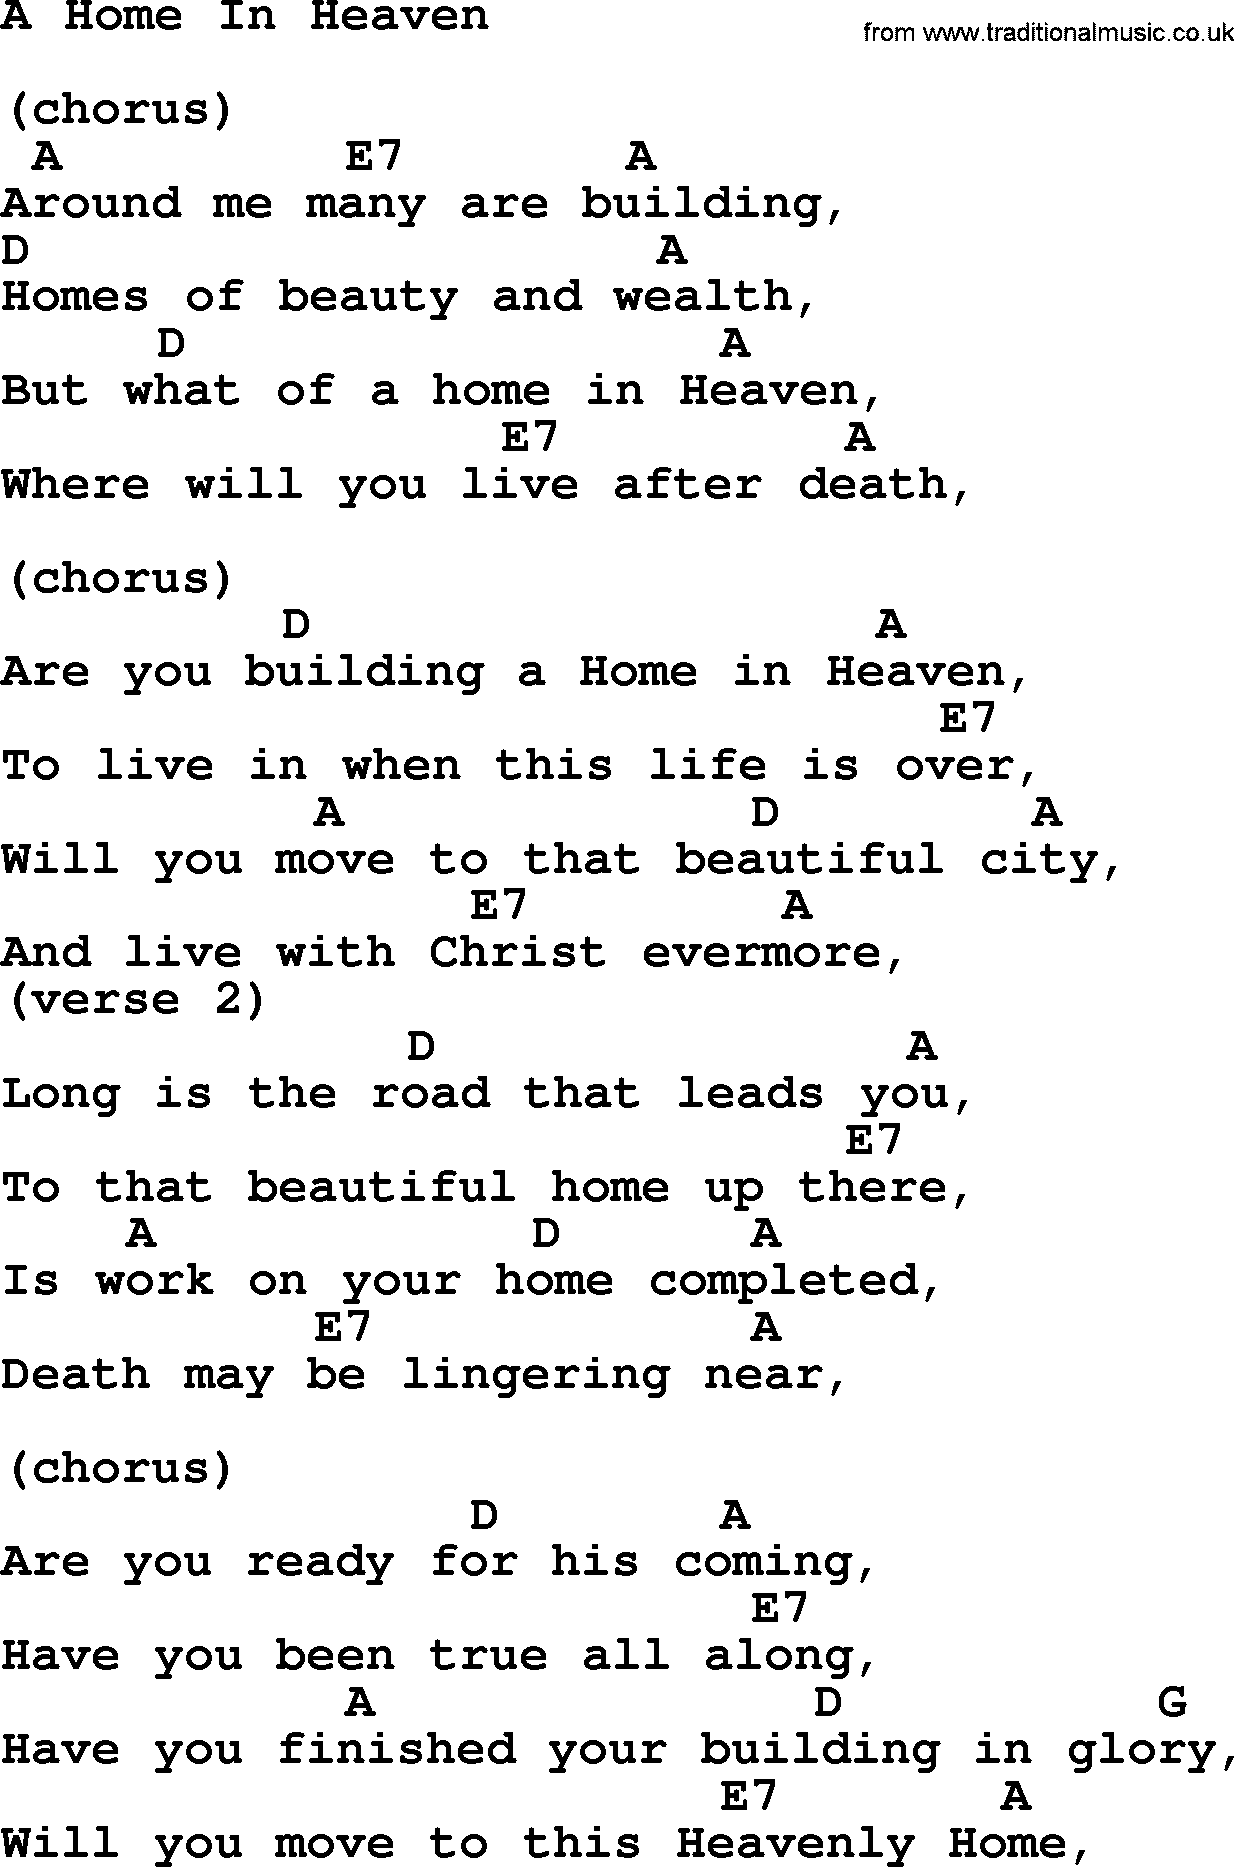 Hank Williams song A Home In Heaven, lyrics and chords